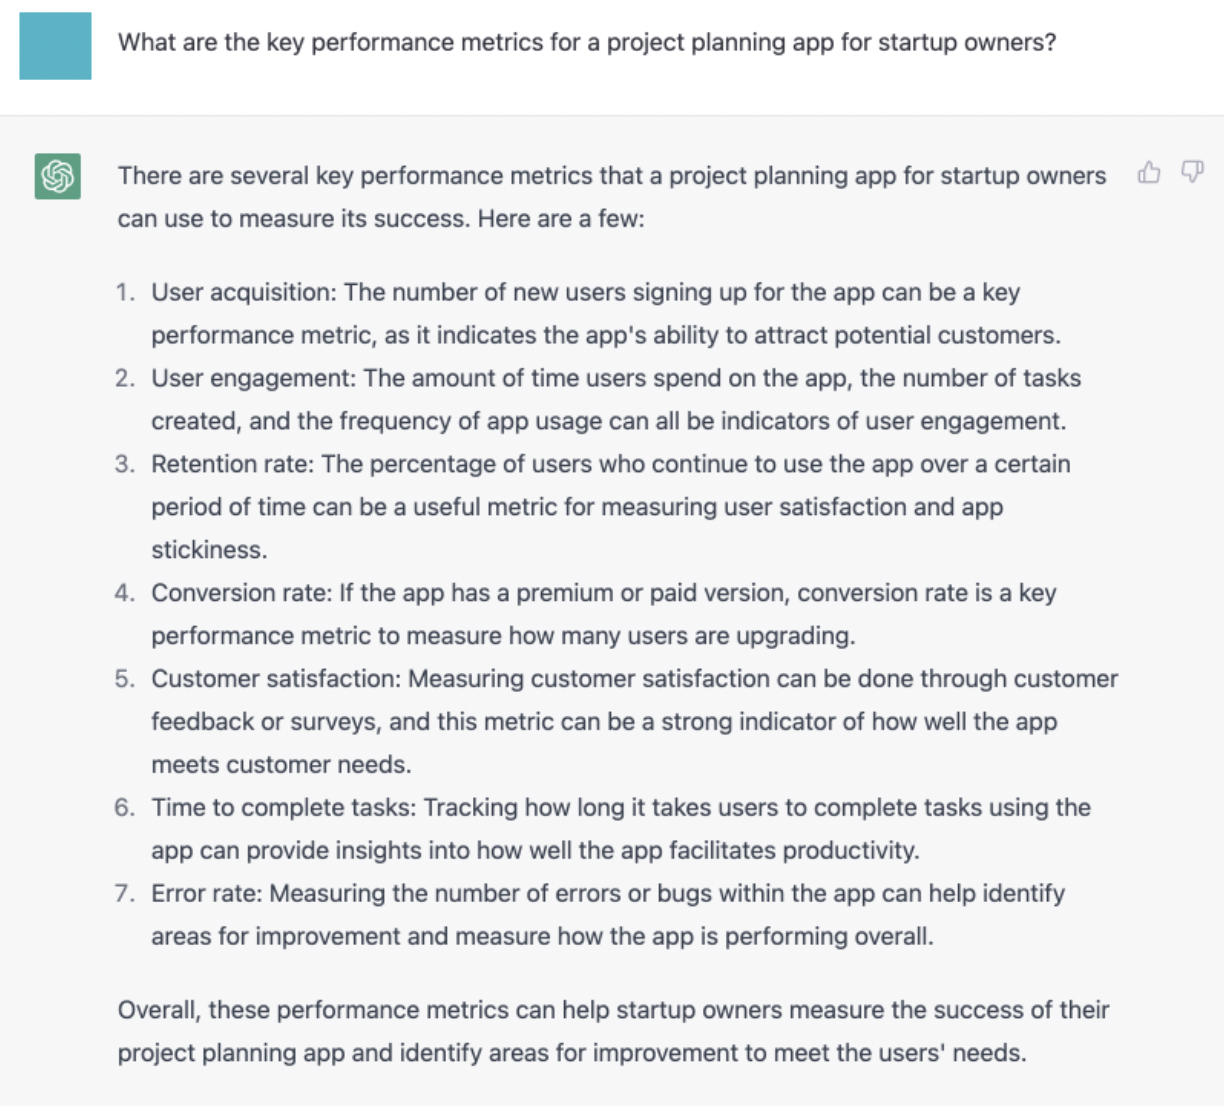 Use case with a prompt “What are the key performance metrics for a project planning app for startup owners?”.